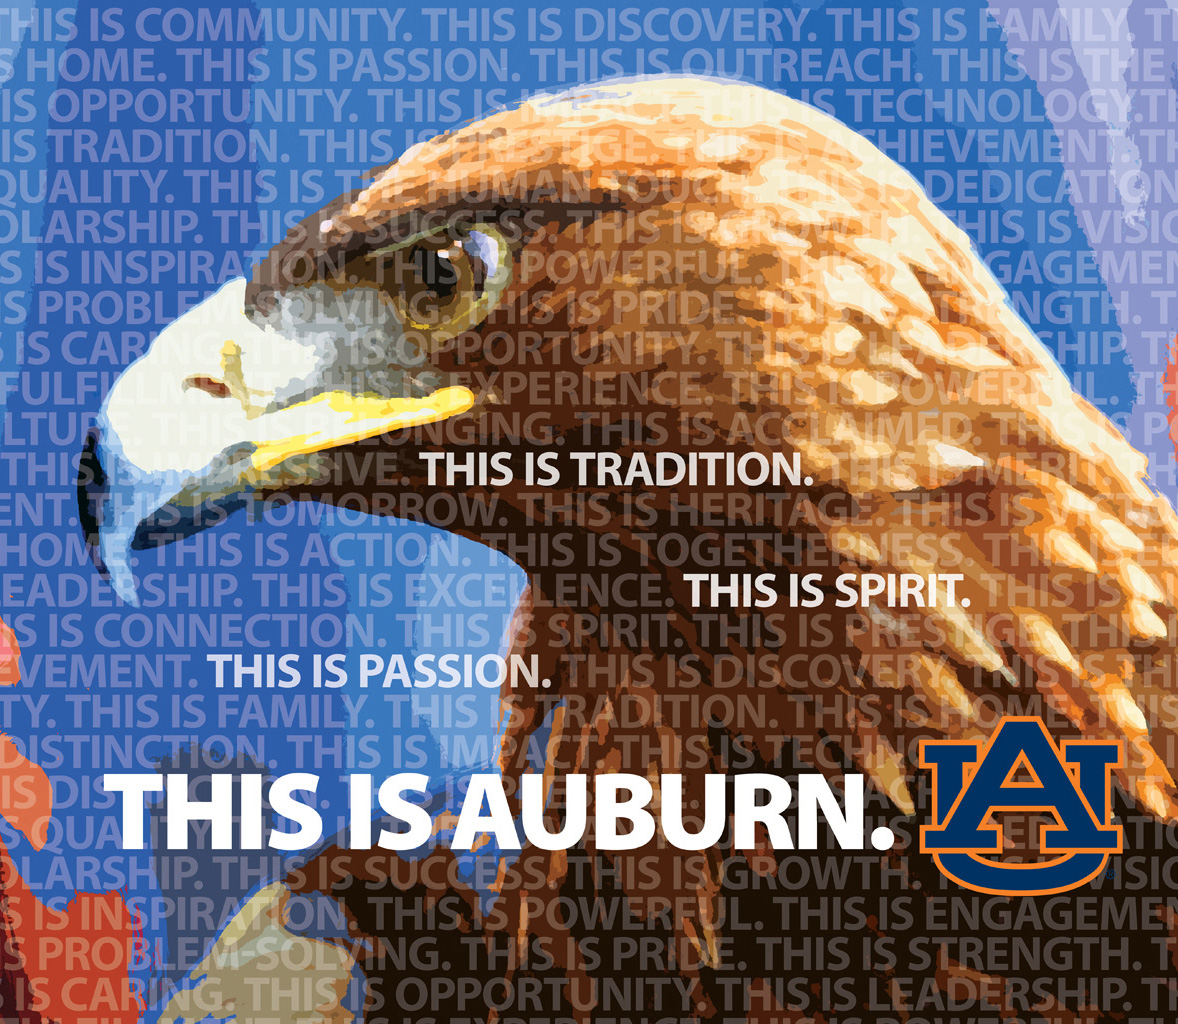 Office of Communications and Marketing - Wallpapers - Auburn